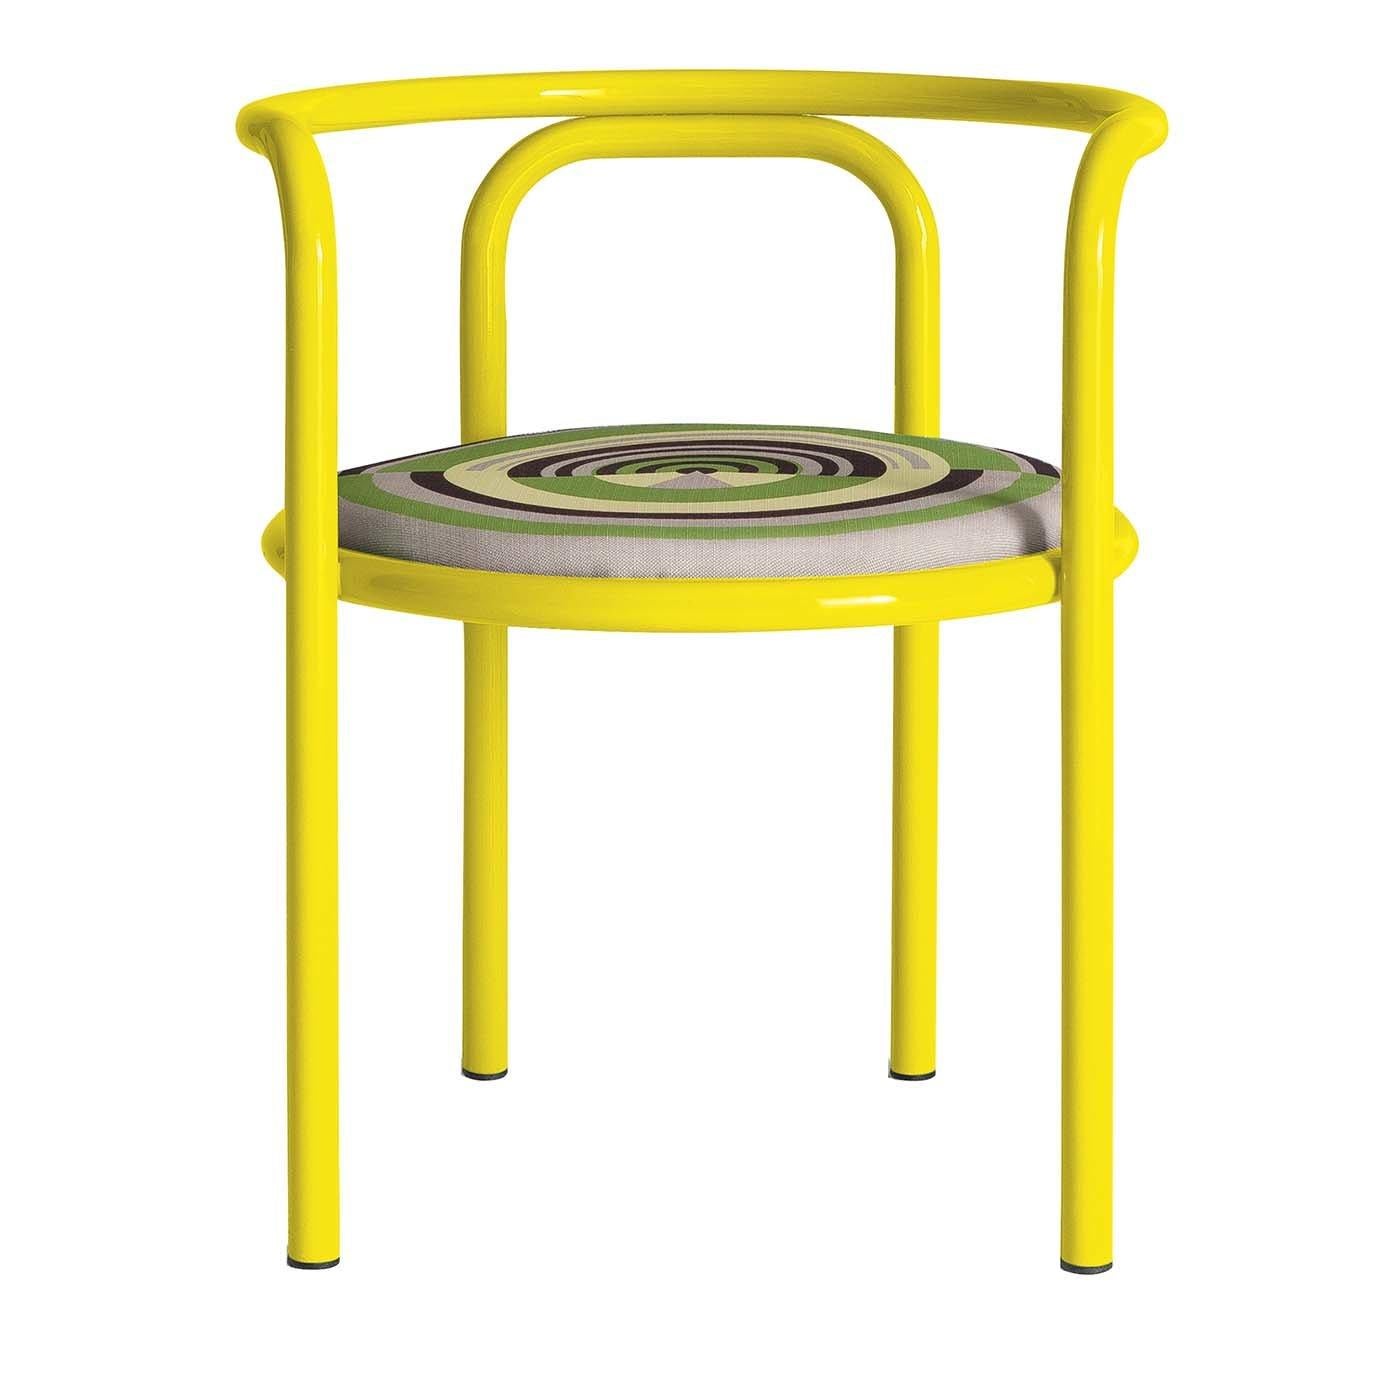 Italian Set of Locus Solus Yellow Dining Table + Chairs + Loveseats + for Tess